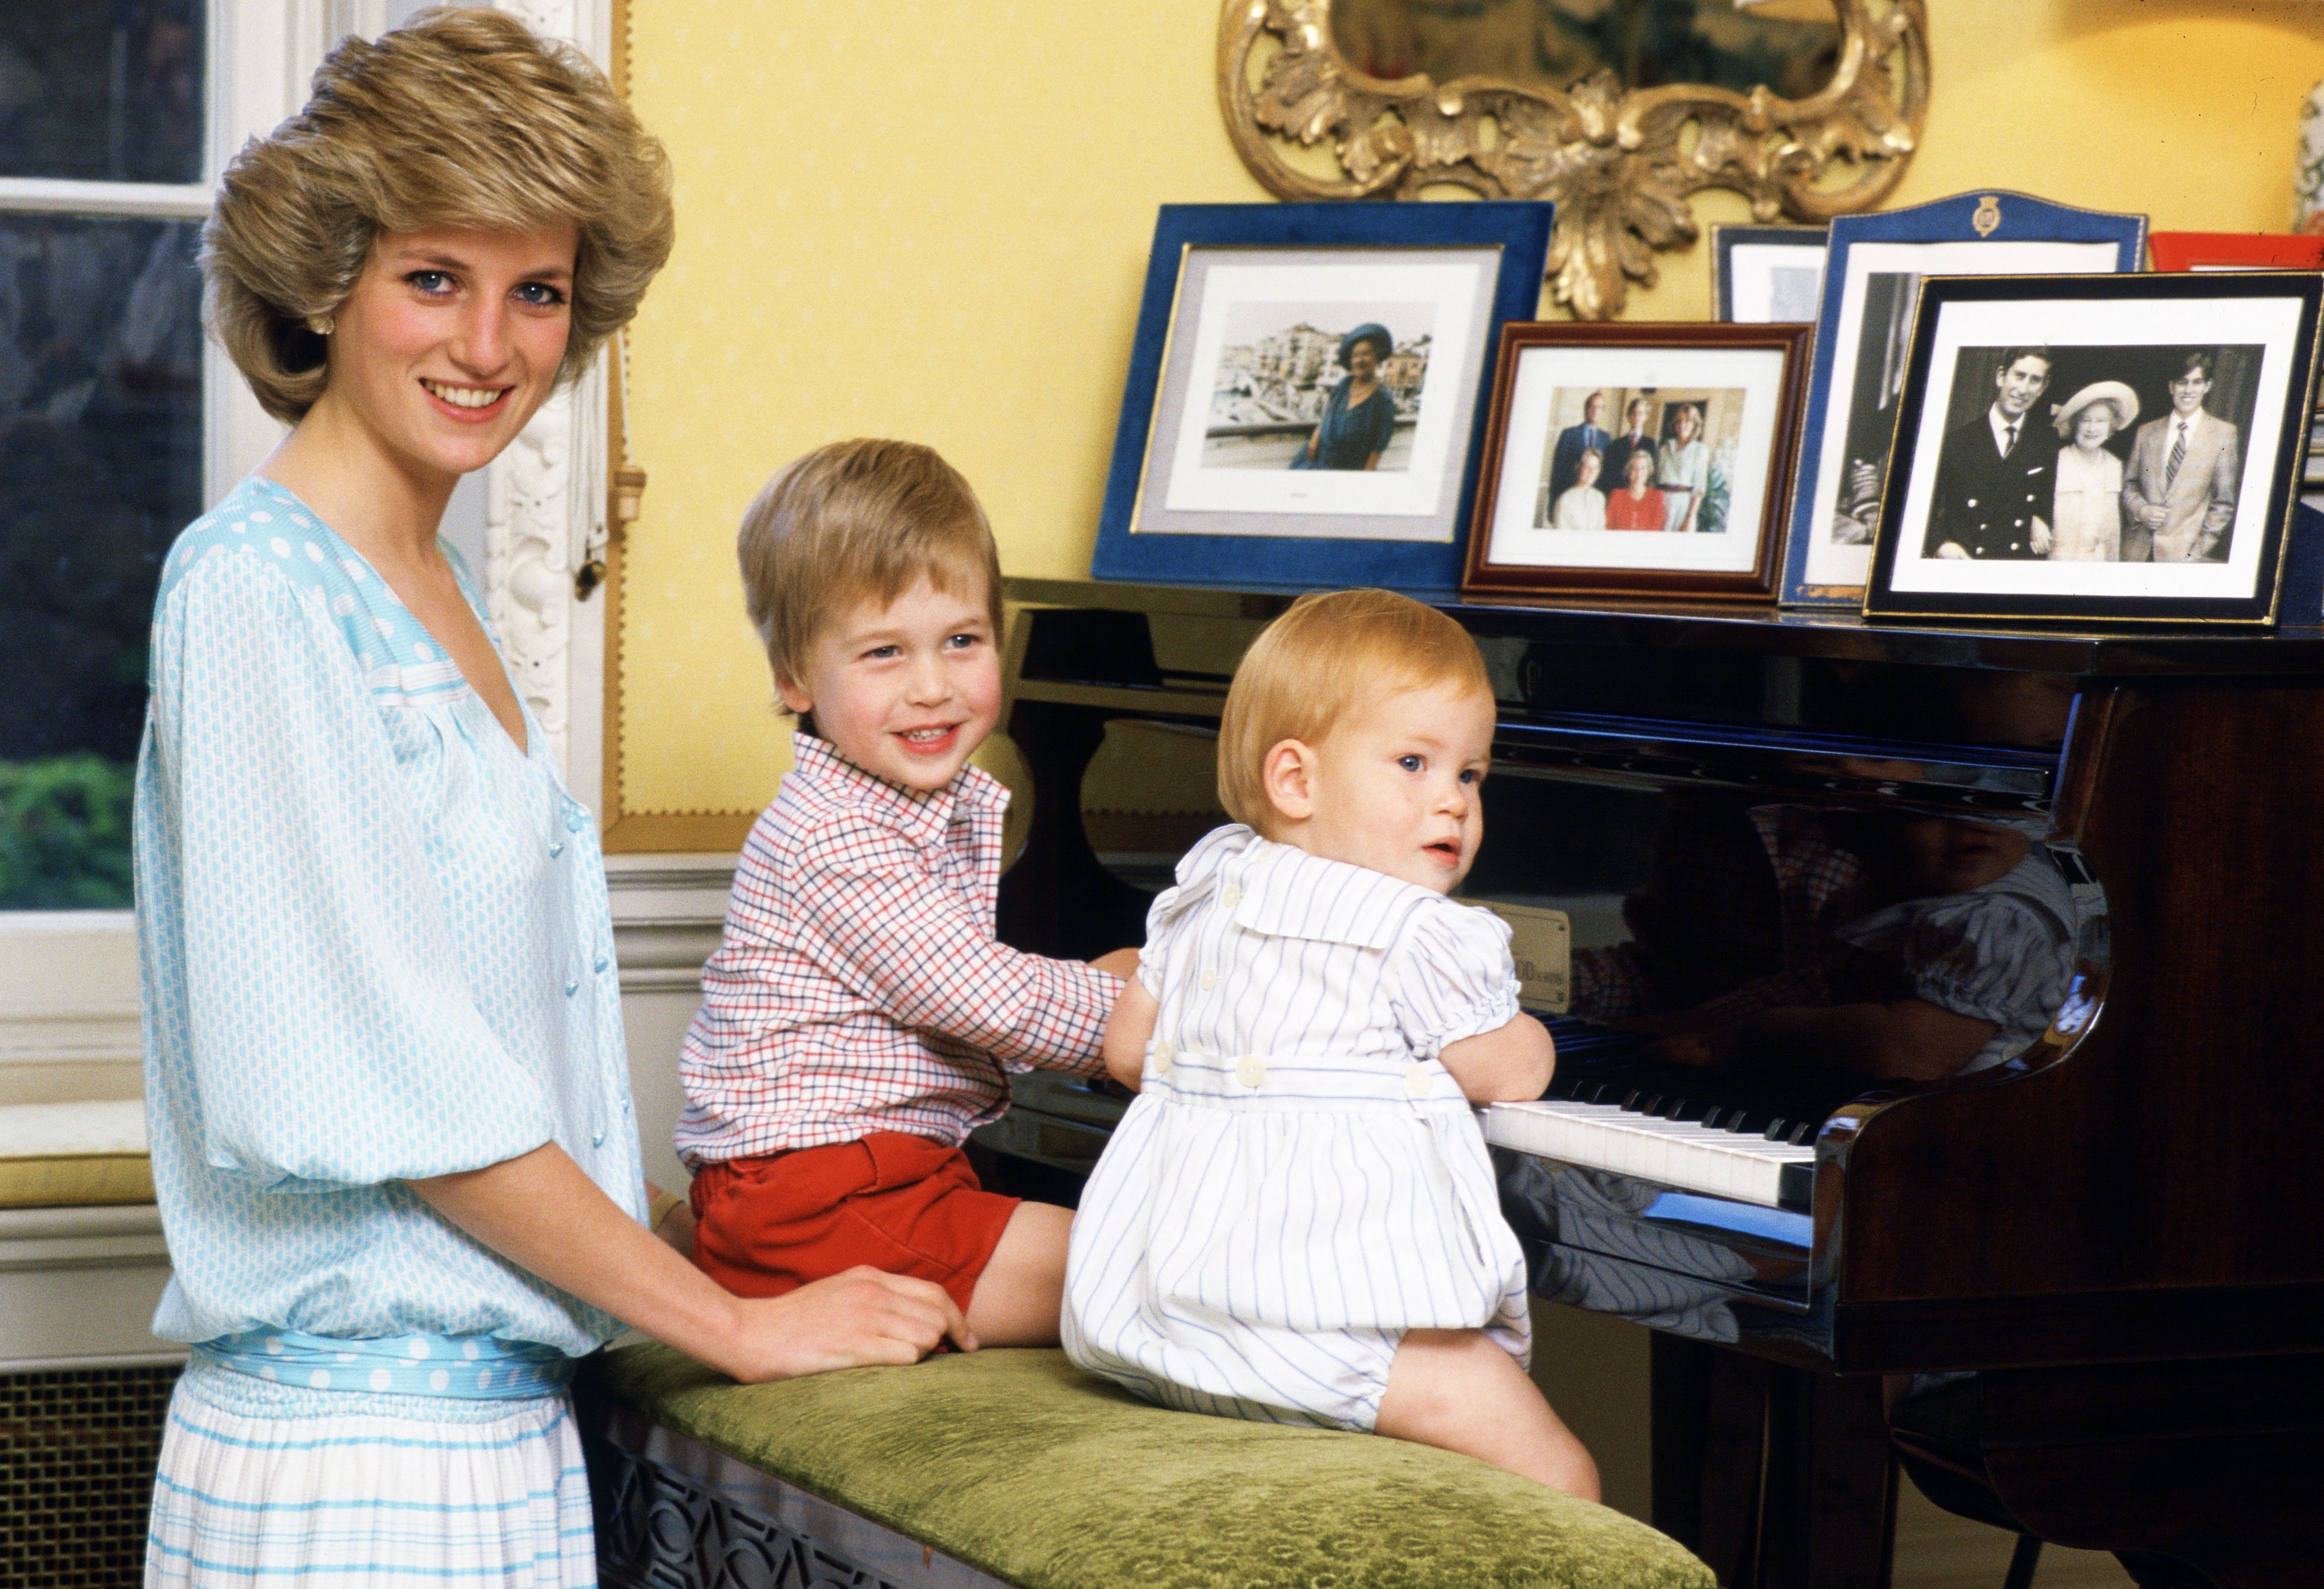 Diana, Princess of Wales with her sons, Prince William and Prince Harry pictured playing the piano in Kensington Palace. / Source: Getty Images